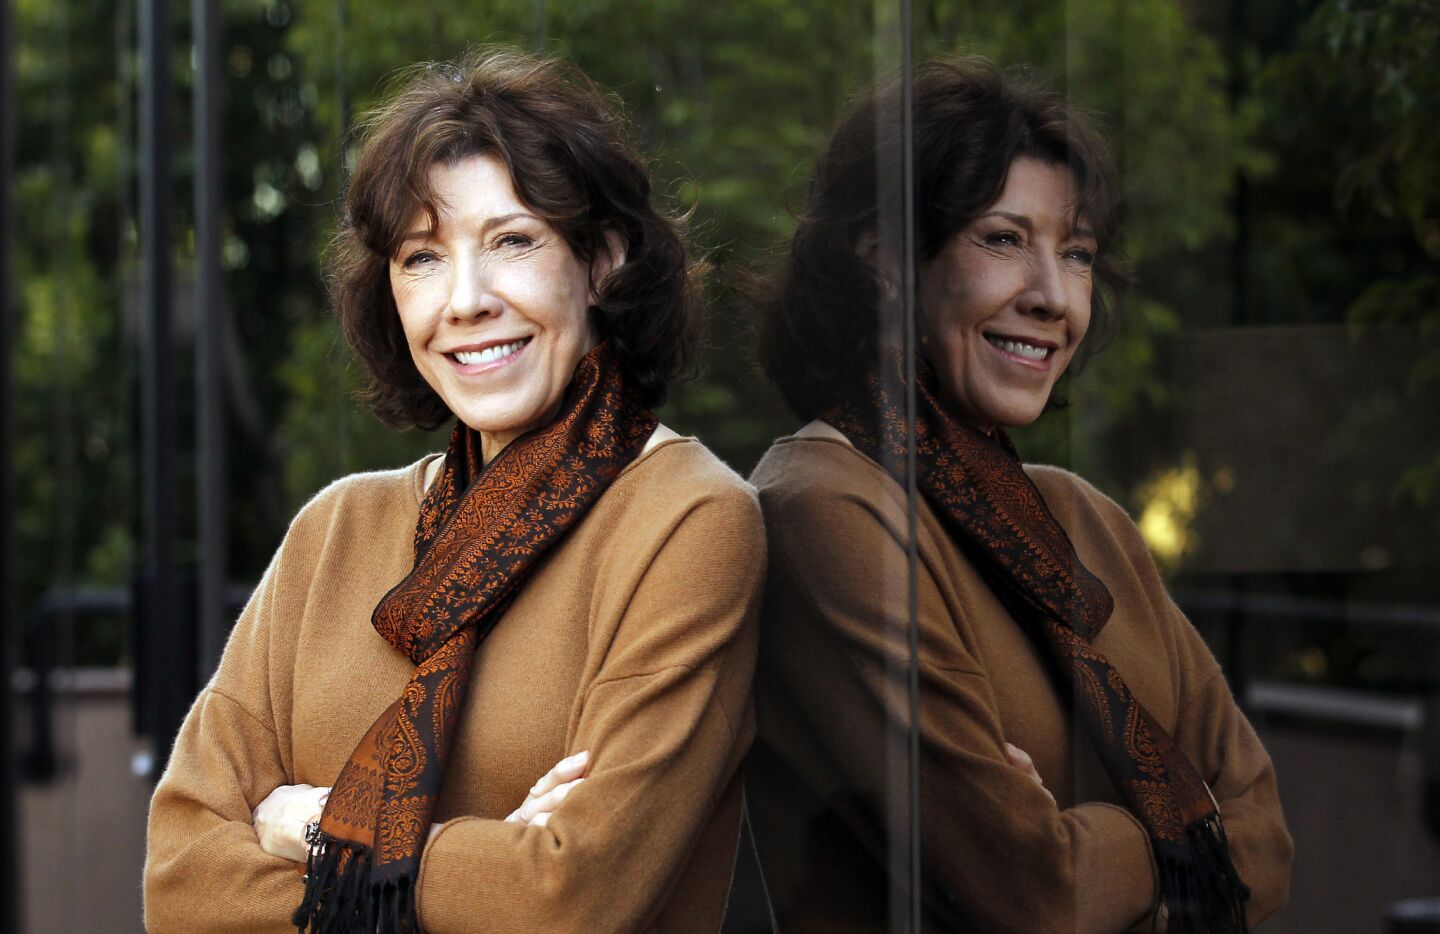 Never let it be said that Lily Tomlin and Jane Wagner rushed into marriage. After 42 years together, the couple were married New Year's Eve, with reports and confirmations surfacing Jan. 3 and the following week. "They're very happy," Tomlin's rep told E! News, which said the plans have reportedly been bubbling at least since August and that the women married in a private ceremony in Los Angeles.